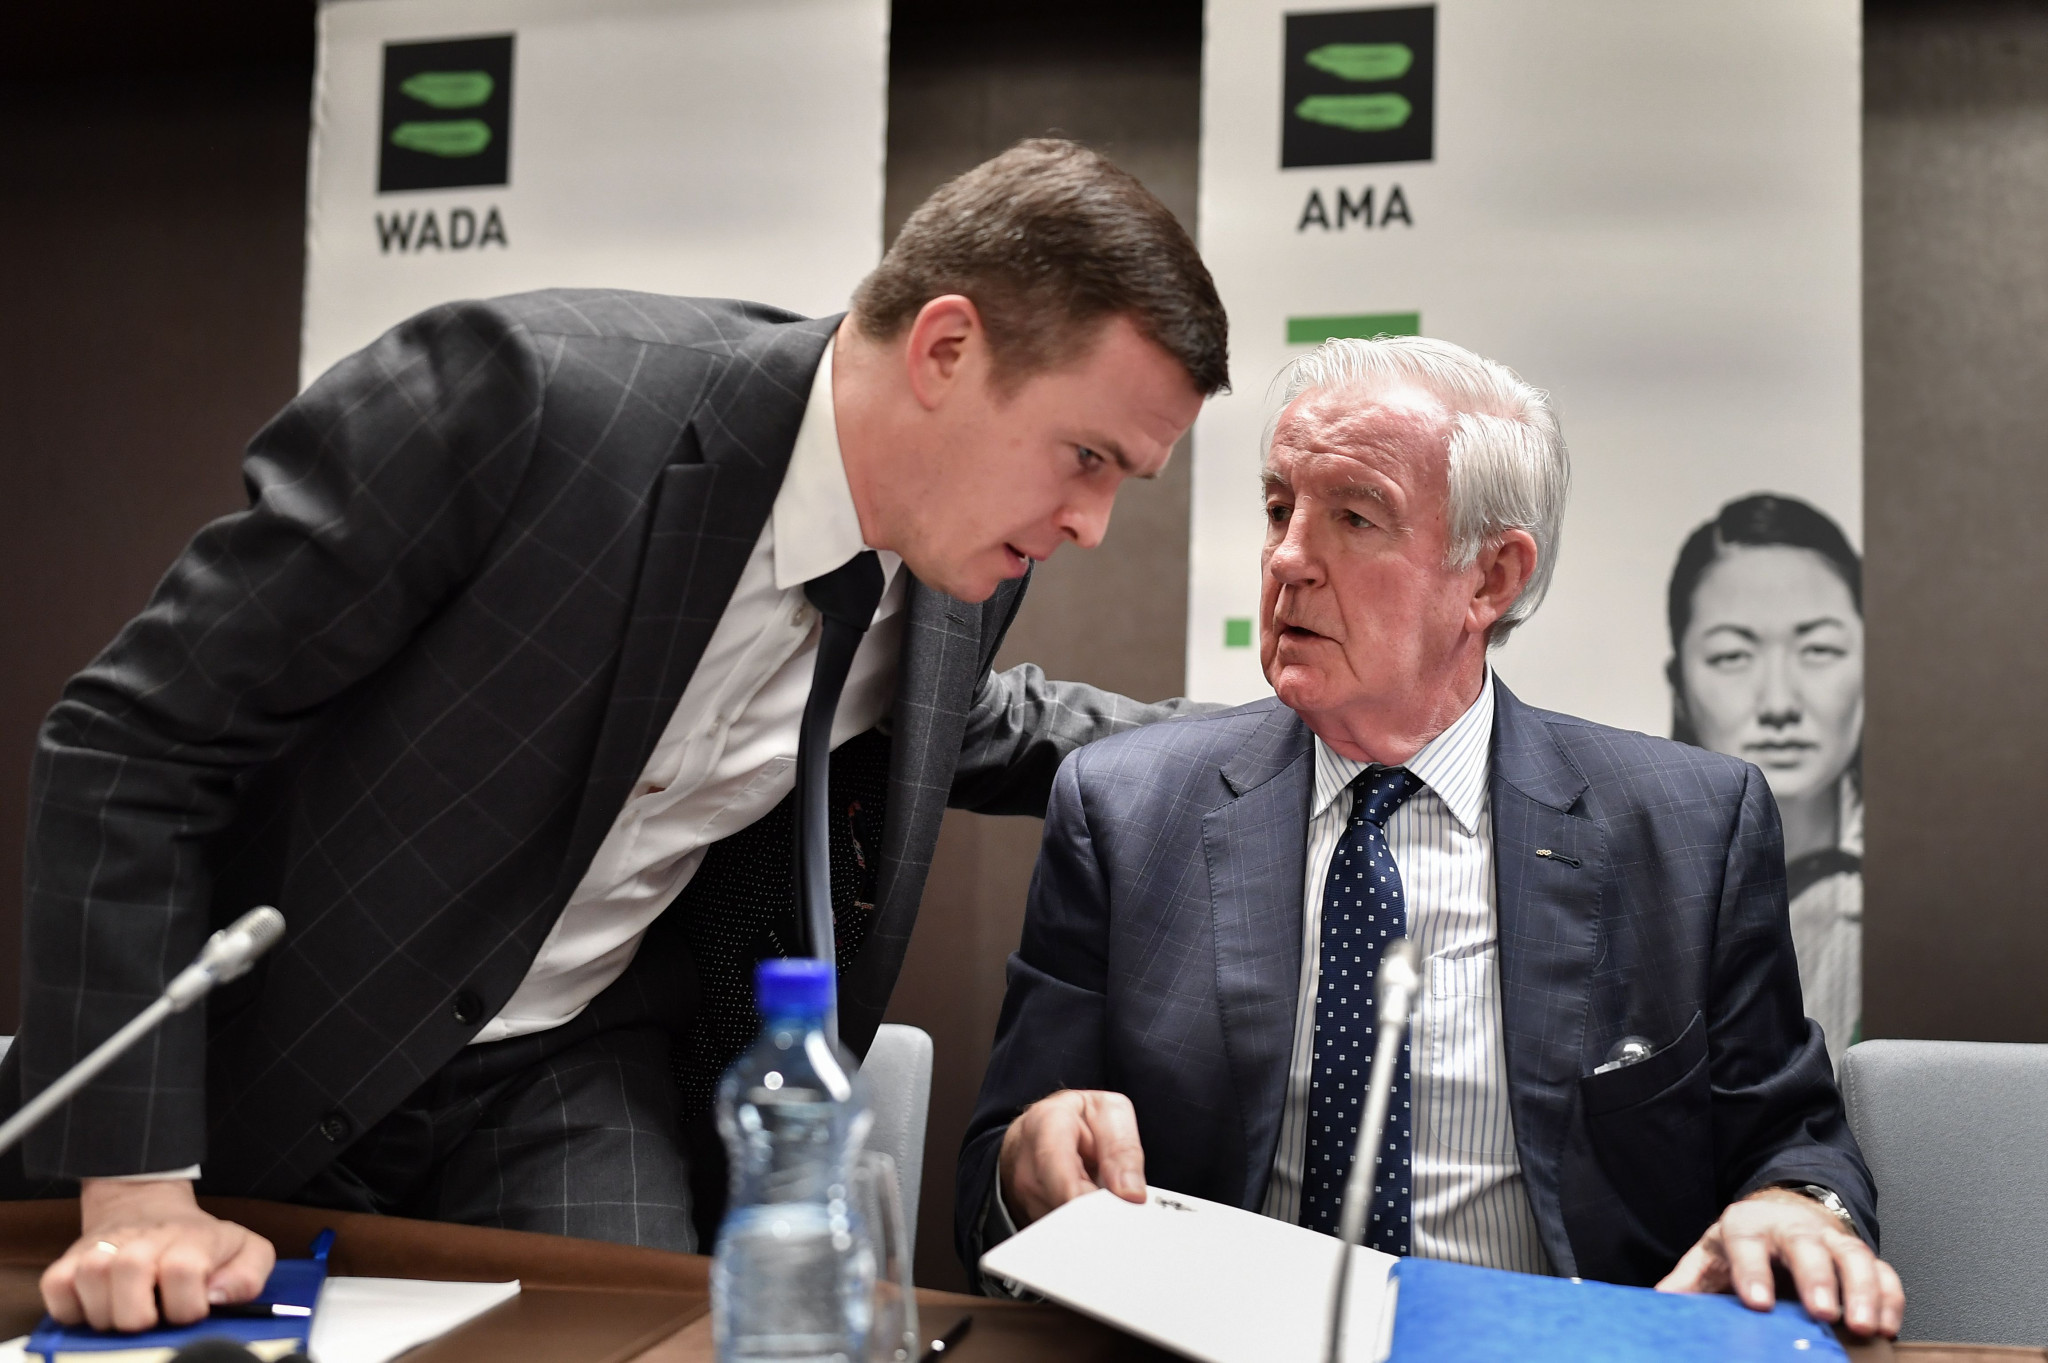 Witold Bańka takes over from Sir Craig Reedie as WADA President from January 1 ©Getty Images